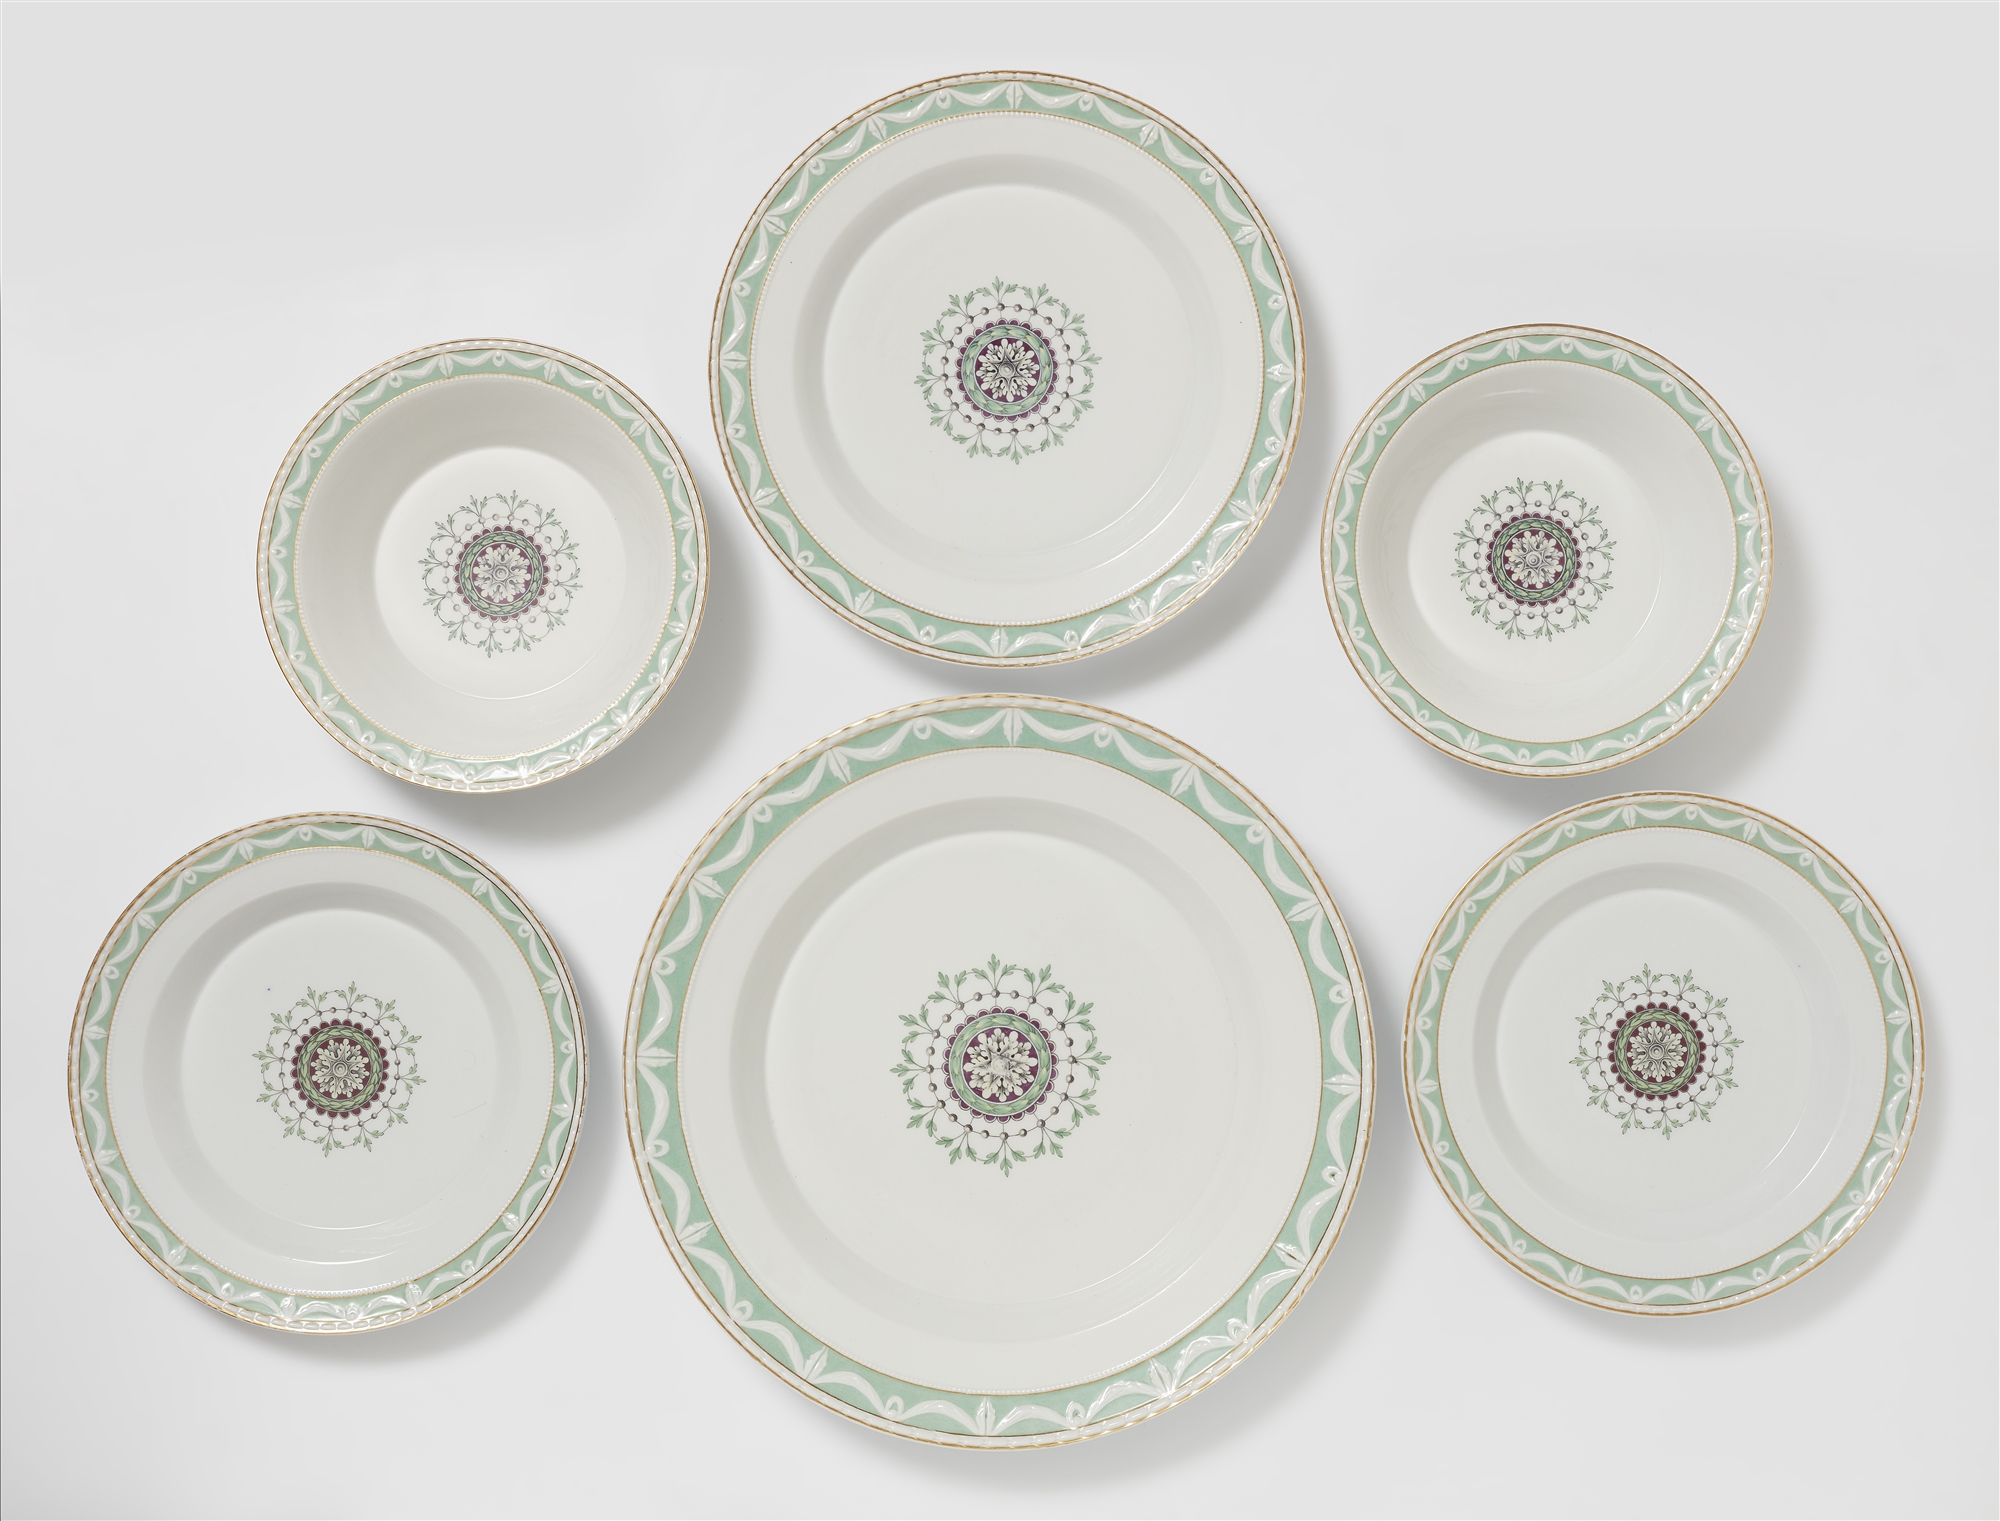 Six Berlin KPM porcelain dishes from a dinner service with a Neoclassical medallion